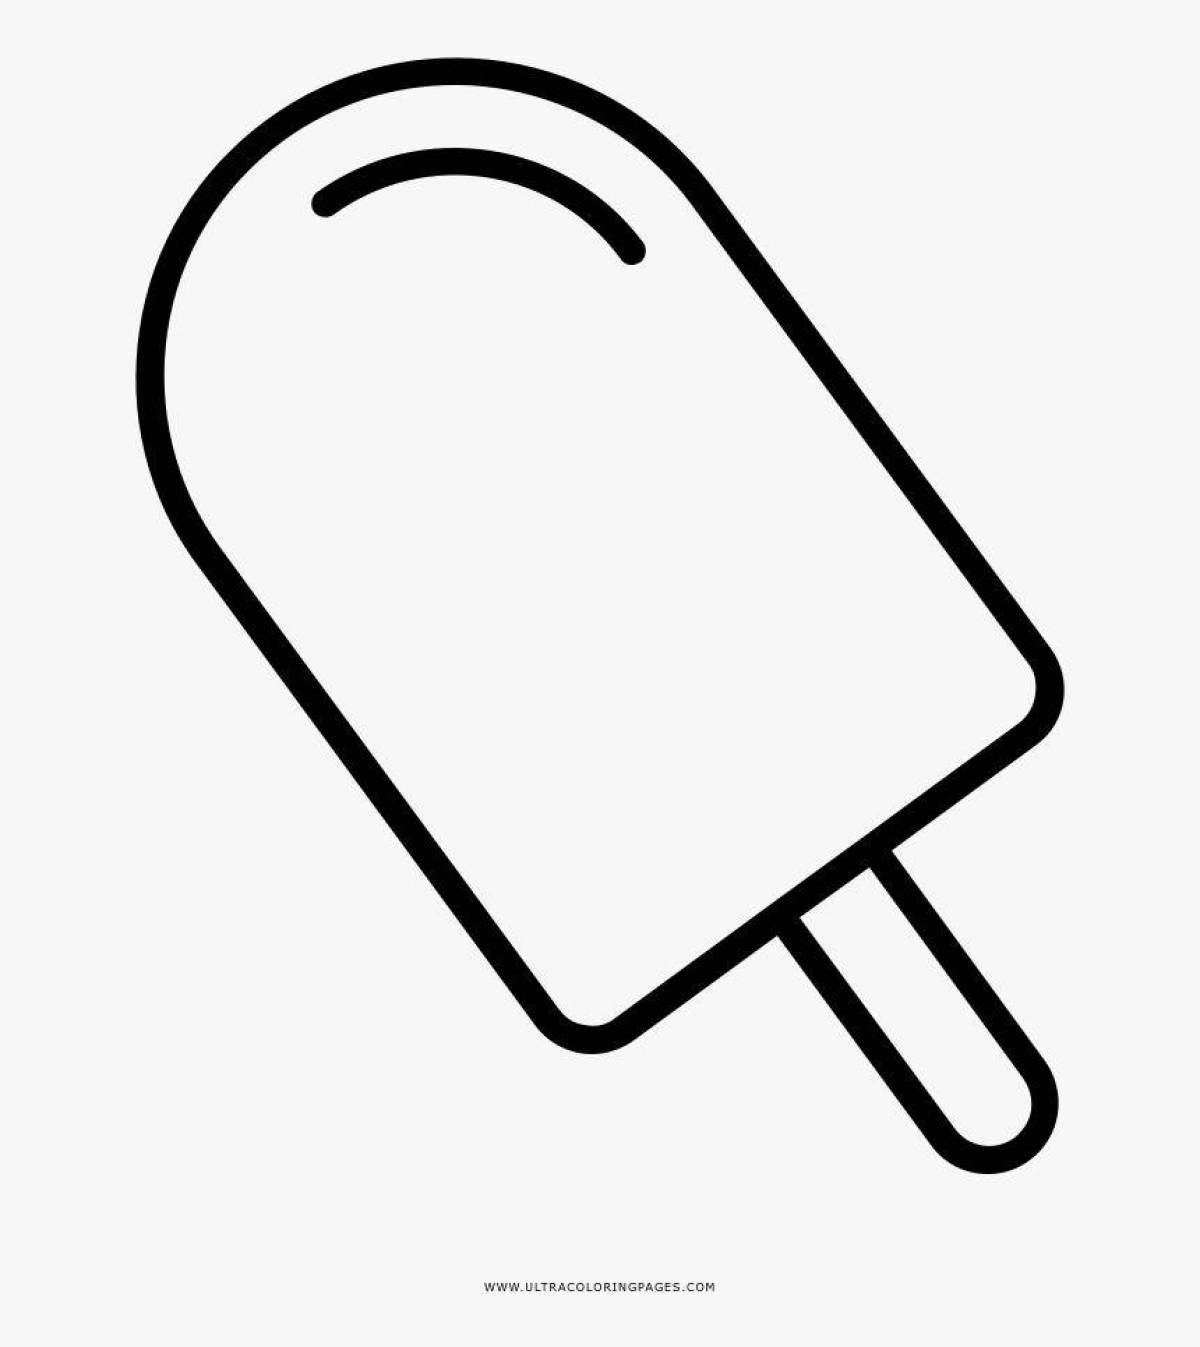 Adorable popsicle coloring book